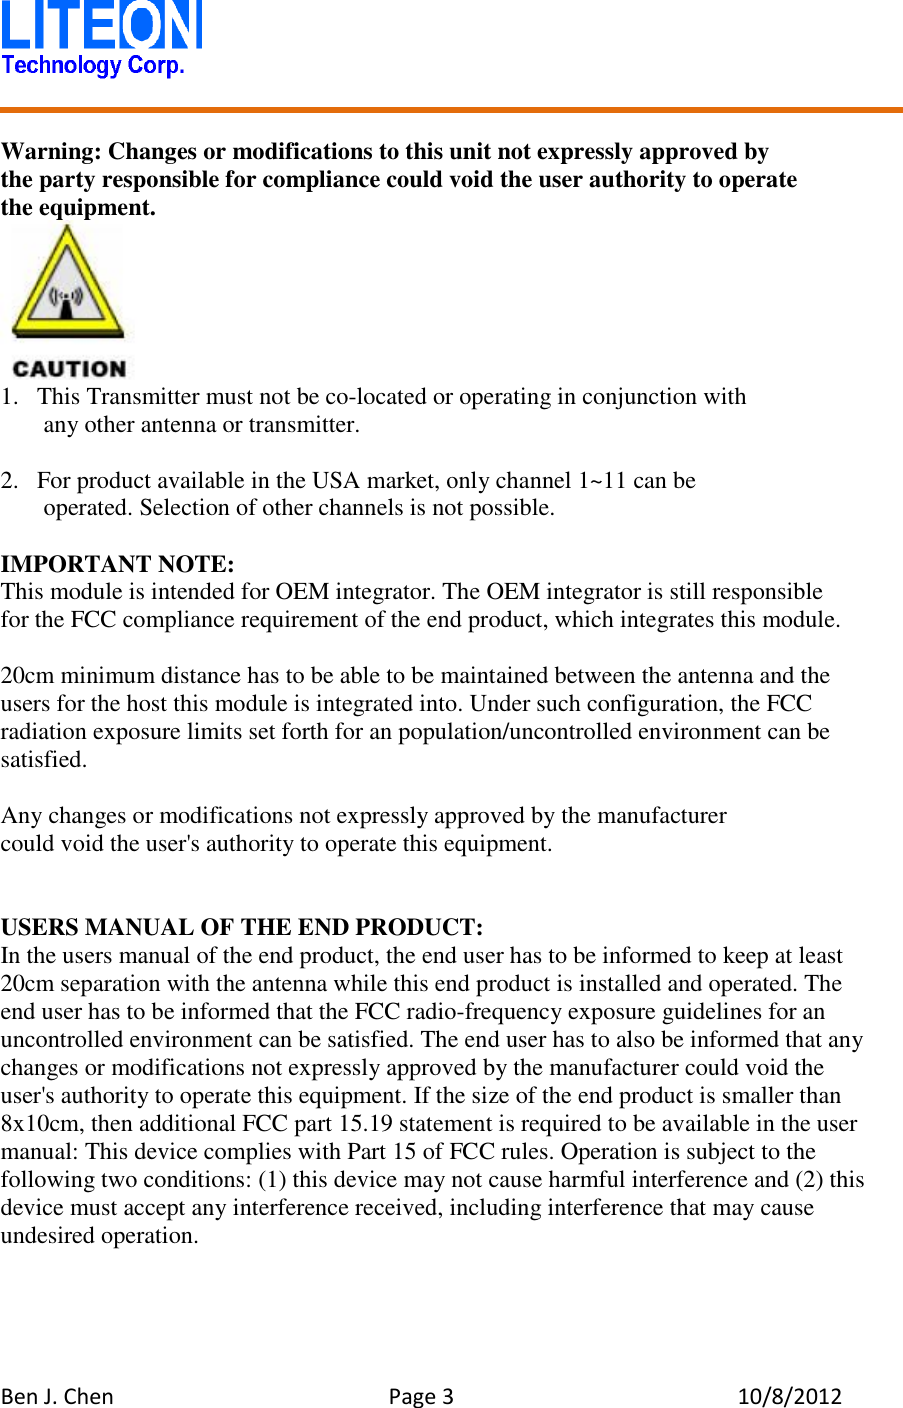   Ben J. Chen  Page 3  10/8/2012    Warning: Changes or modifications to this unit not expressly approved by the party responsible for compliance could void the user authority to operate   the equipment.  1. This Transmitter must not be co-located or operating in conjunction with any other antenna or transmitter.  2. For product available in the USA market, only channel 1~11 can be operated. Selection of other channels is not possible.  IMPORTANT NOTE: This module is intended for OEM integrator. The OEM integrator is still responsible   for the FCC compliance requirement of the end product, which integrates this module.  20cm minimum distance has to be able to be maintained between the antenna and the users for the host this module is integrated into. Under such configuration, the FCC radiation exposure limits set forth for an population/uncontrolled environment can be satisfied.  Any changes or modifications not expressly approved by the manufacturer could void the user&apos;s authority to operate this equipment.   USERS MANUAL OF THE END PRODUCT: In the users manual of the end product, the end user has to be informed to keep at least 20cm separation with the antenna while this end product is installed and operated. The end user has to be informed that the FCC radio-frequency exposure guidelines for an uncontrolled environment can be satisfied. The end user has to also be informed that any changes or modifications not expressly approved by the manufacturer could void the user&apos;s authority to operate this equipment. If the size of the end product is smaller than 8x10cm, then additional FCC part 15.19 statement is required to be available in the user manual: This device complies with Part 15 of FCC rules. Operation is subject to the following two conditions: (1) this device may not cause harmful interference and (2) this device must accept any interference received, including interference that may cause undesired operation. 